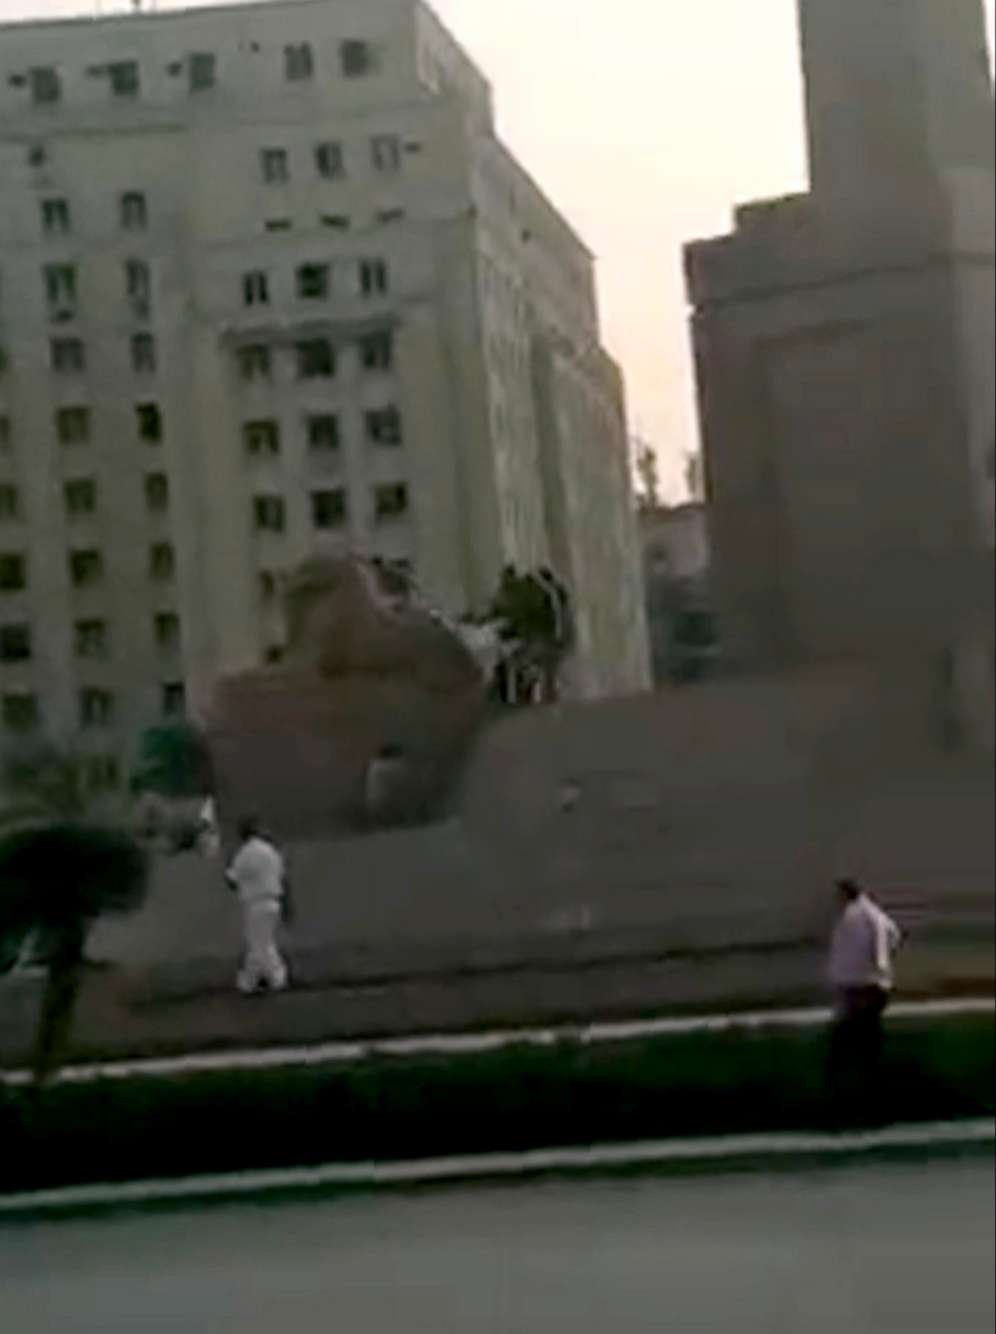 PHOTO: A man attempted to demolish one of four ancient sphinxes adorning the Tahrir square in Cairo before being caught by security personnel, Oct. 19, 2021.